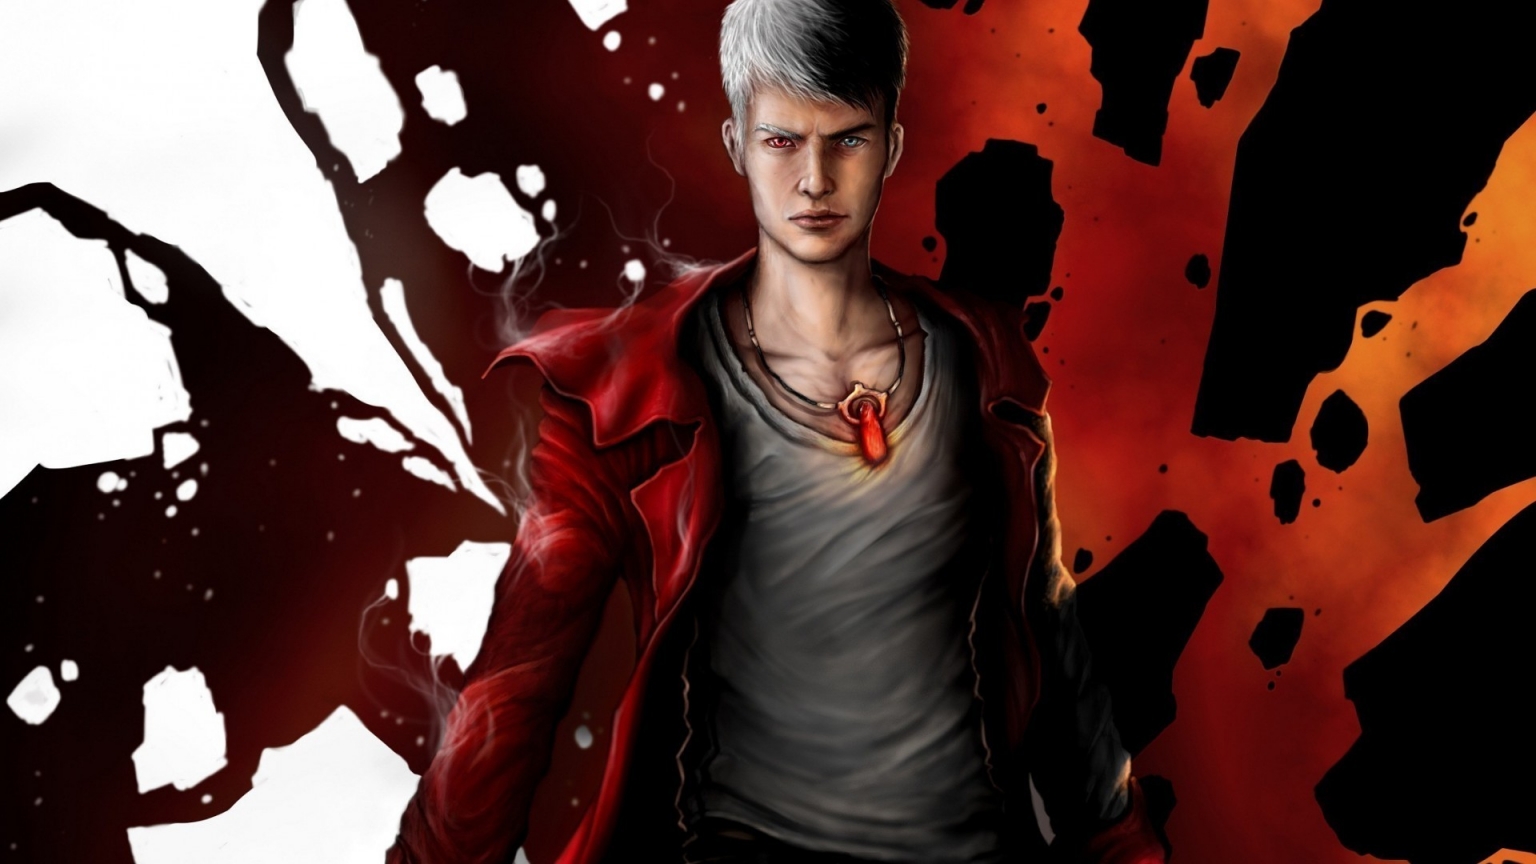 Dante from Devil May Cry for 1536 x 864 HDTV resolution